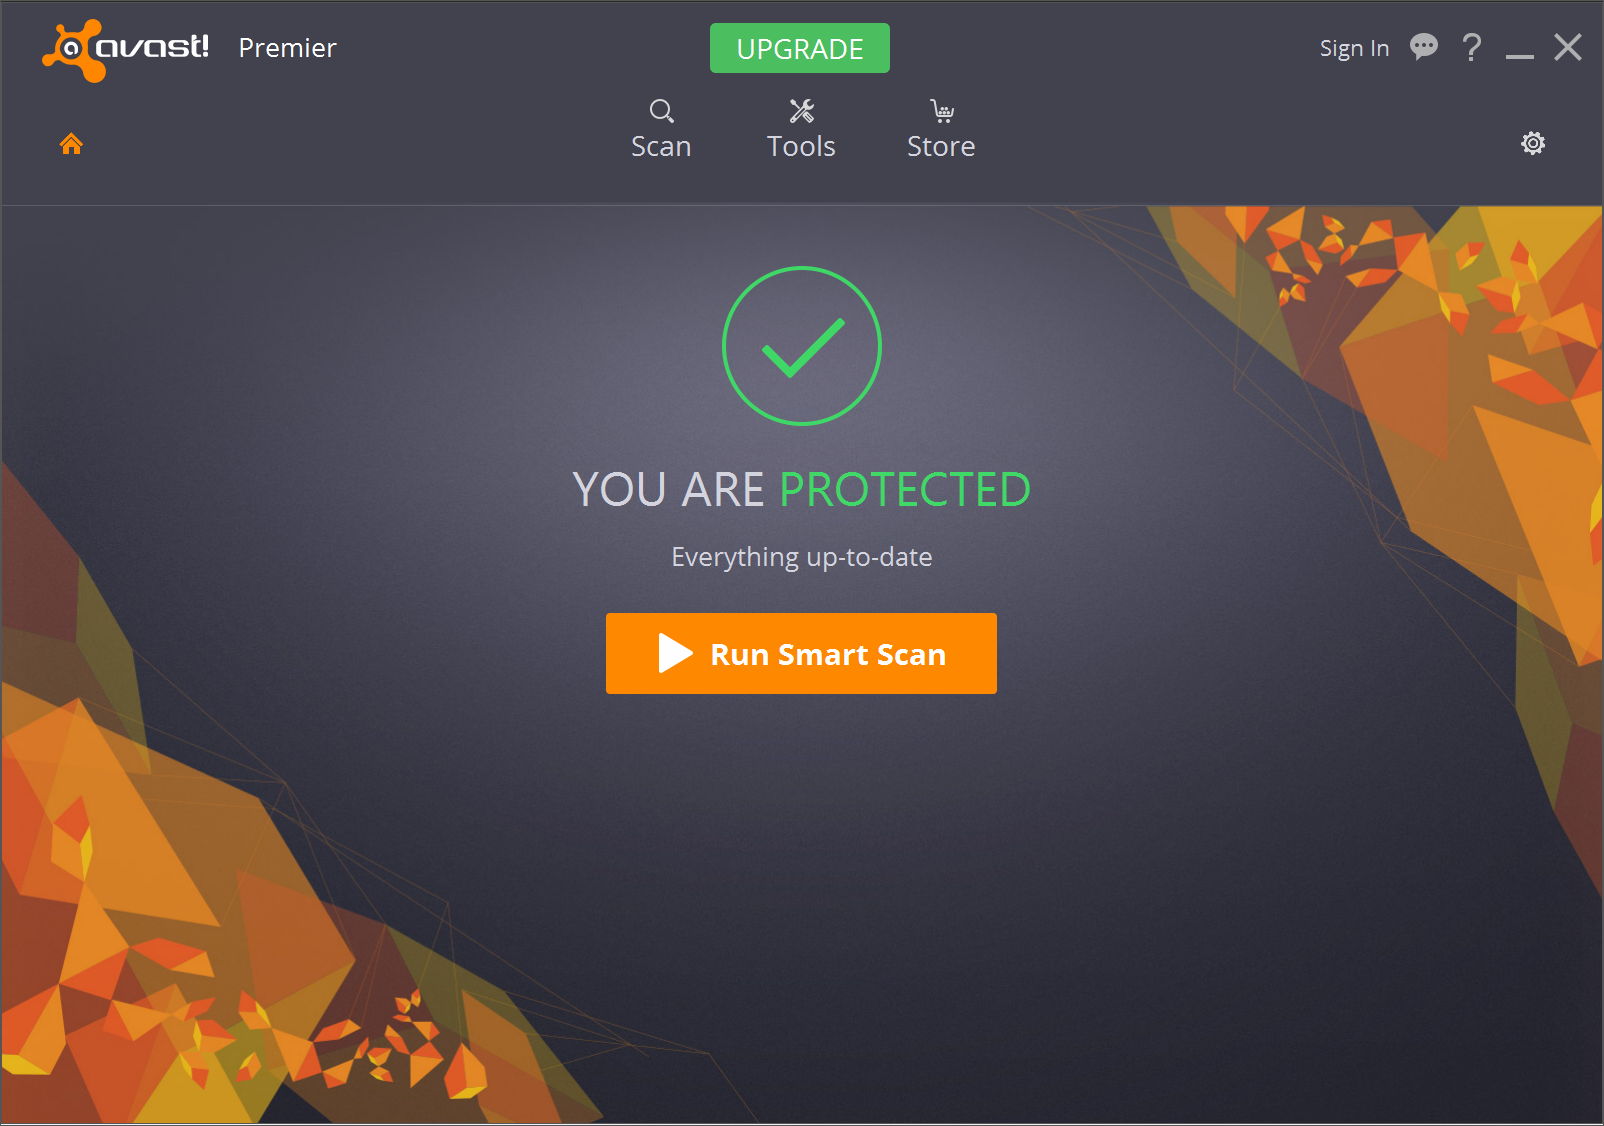 Enter avast activation code